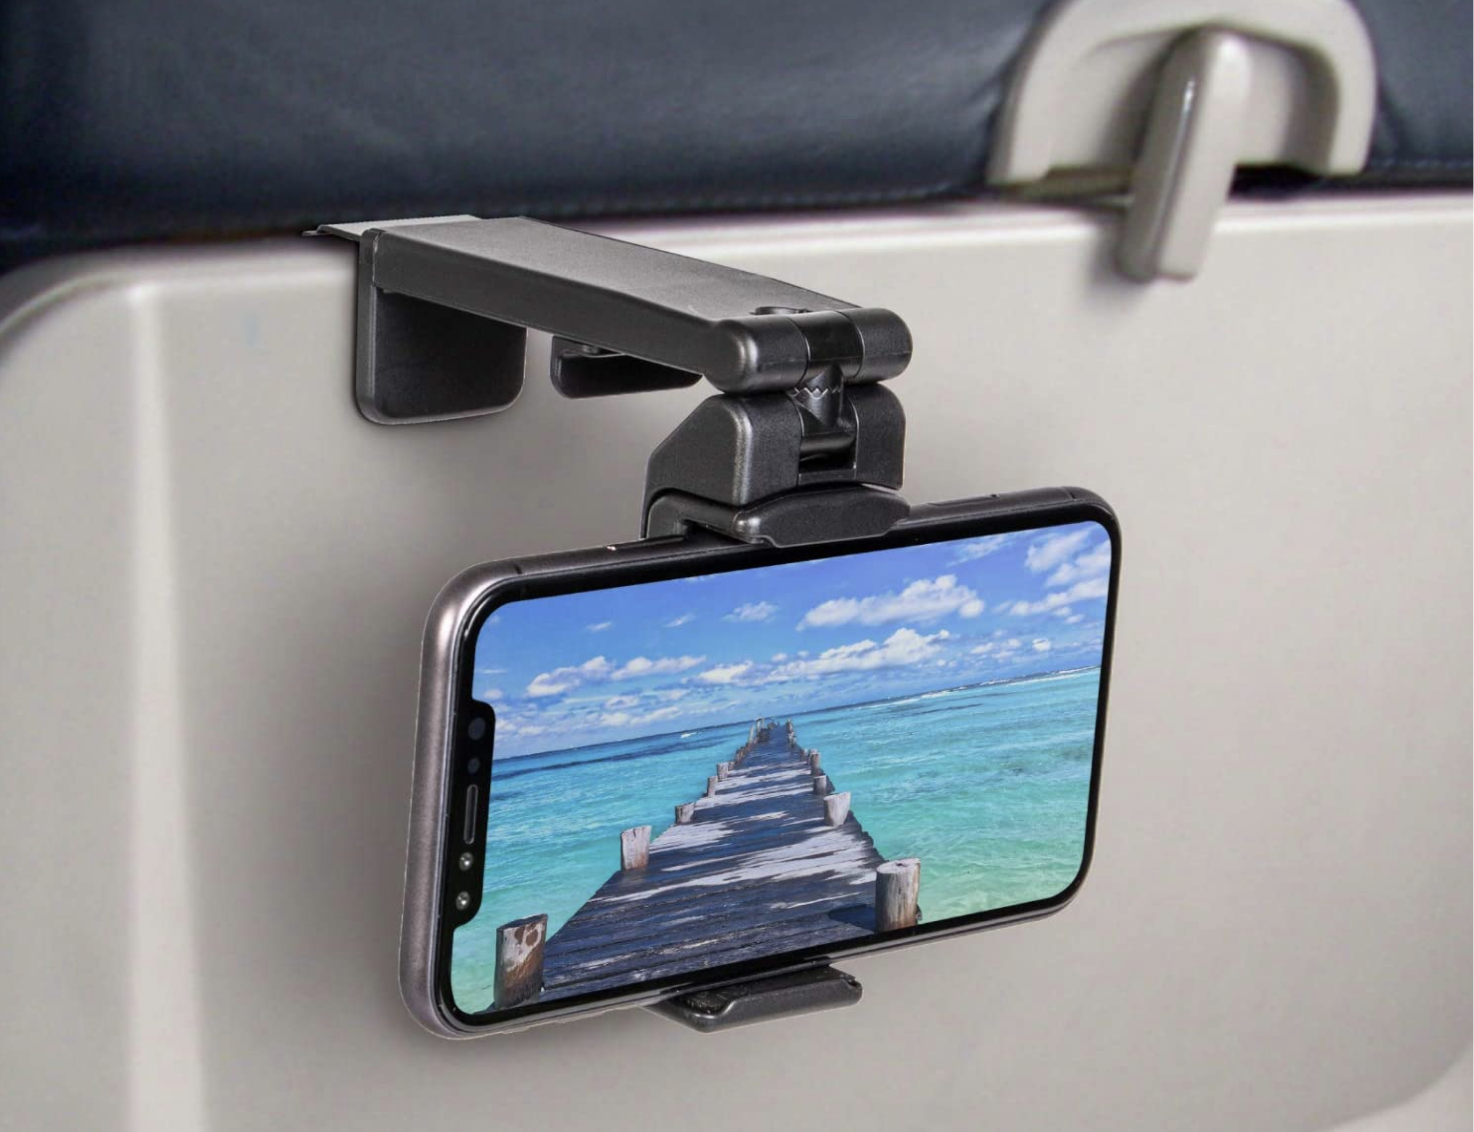 A phone mounted to the back of an airplane tray table